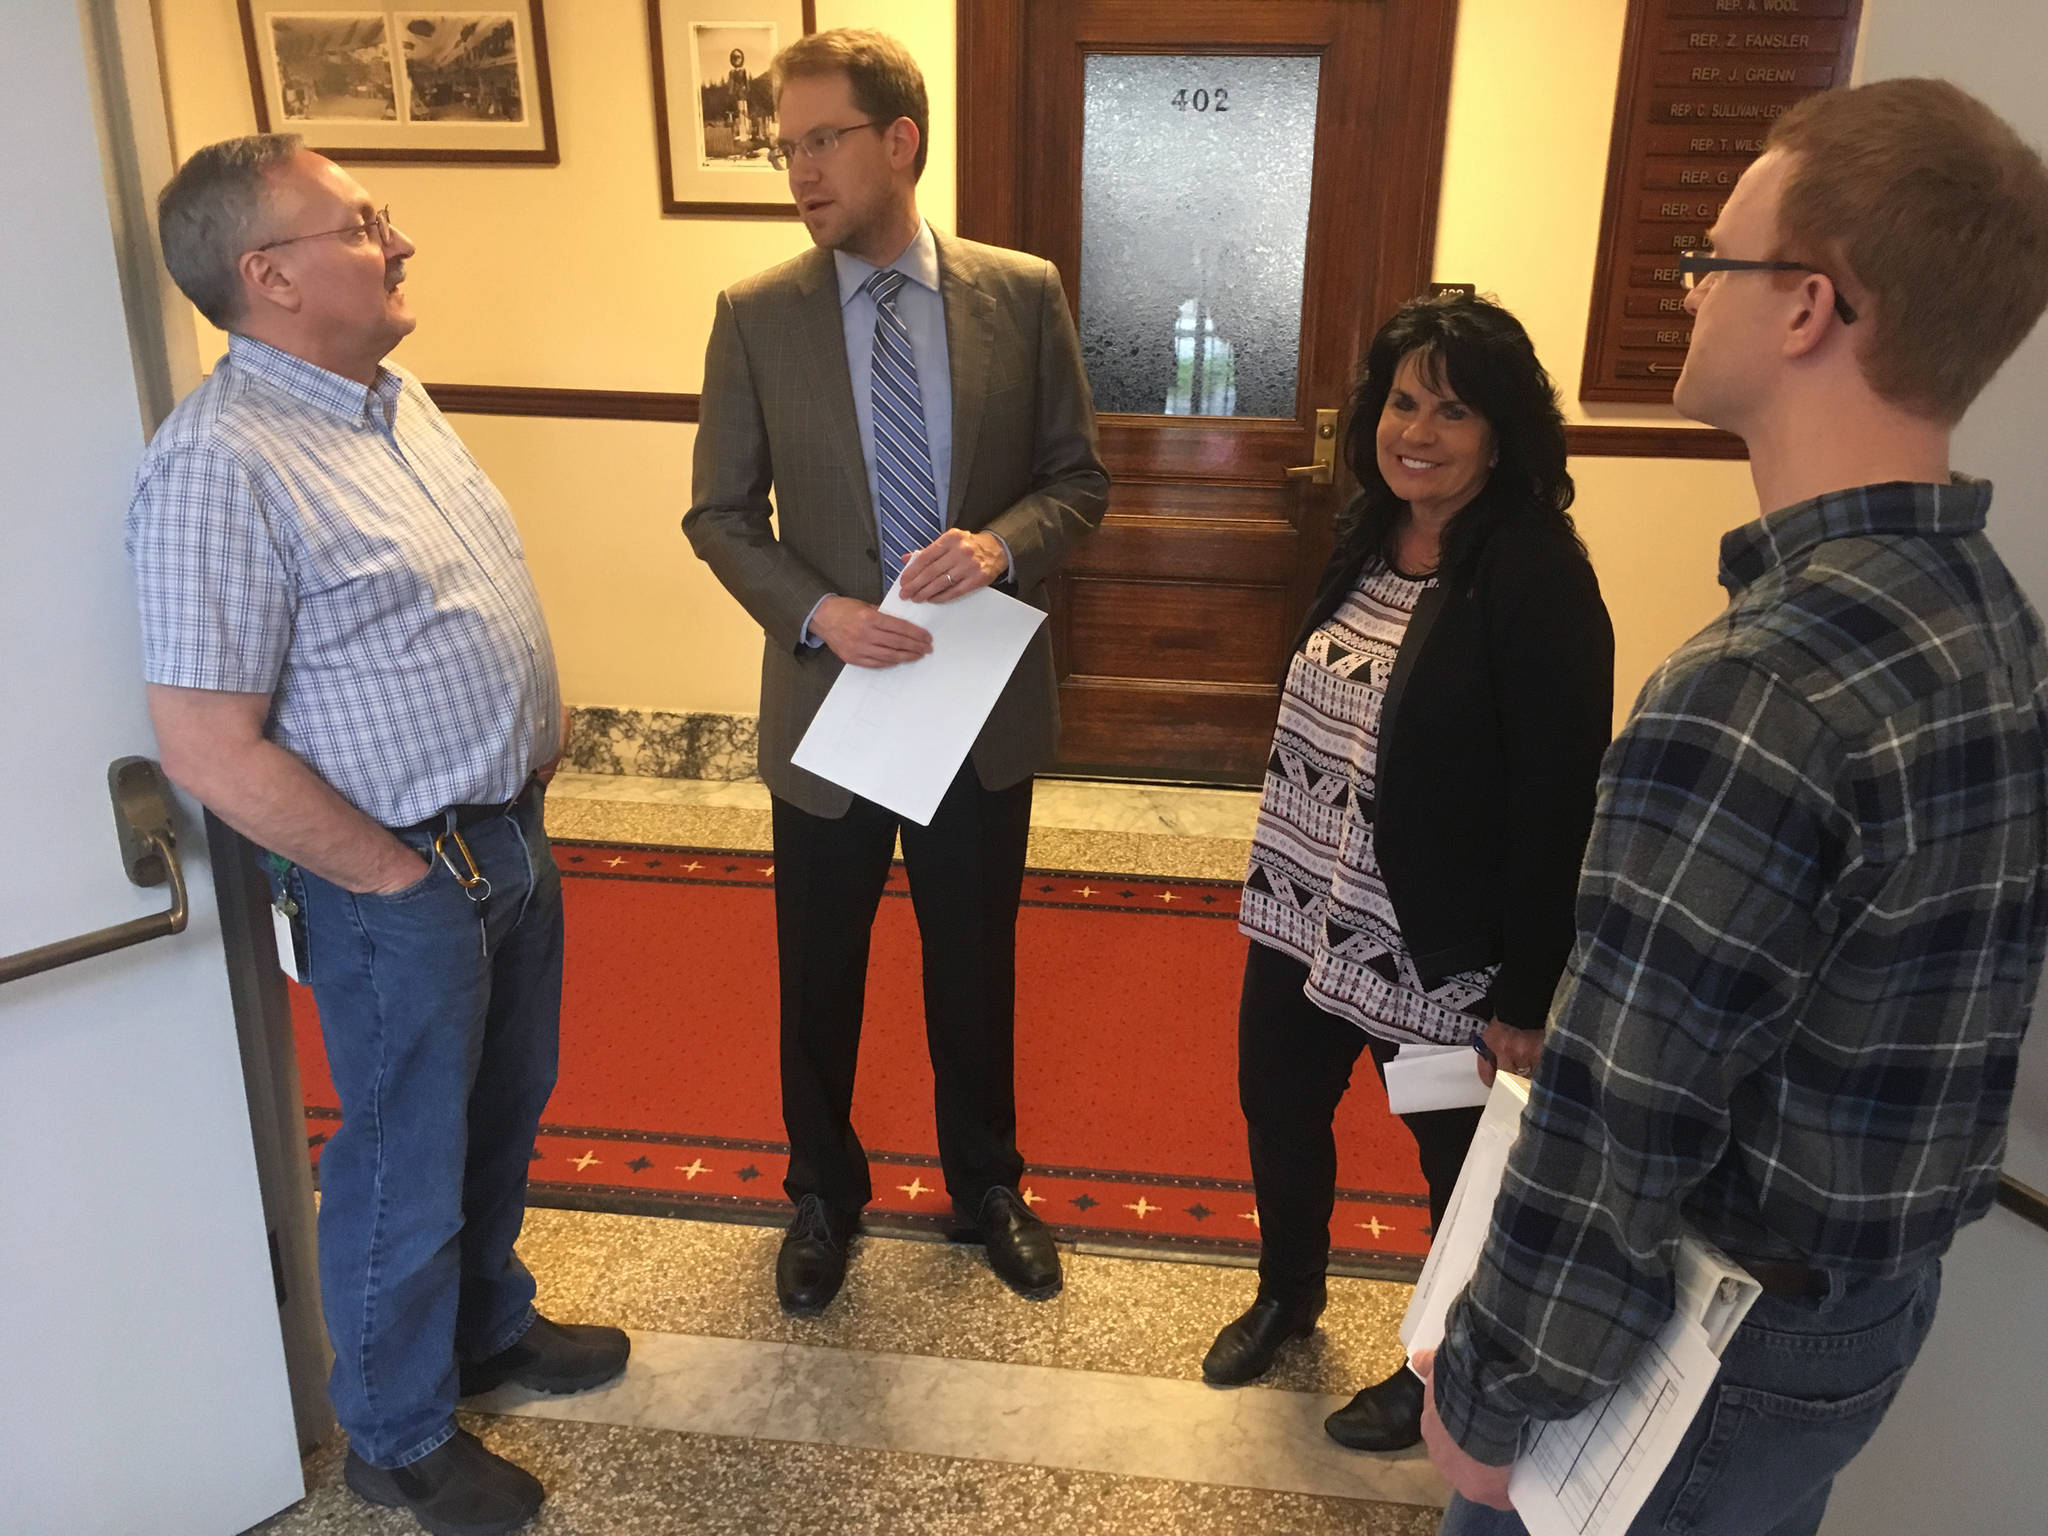 Members of the Republican House Minority discuss Legislative matters in the stairwell of the Alaska Capitol on Wednesday, June 21, 2017. From left to right are Rep. David Talerico, R-Healy; Rep. Lance Pruitt, R-Anchorage; Rep. Cathy Tilton, R-Eagle River; and Rep. David Eastsman, R-Wasilla. (James Brooks | Juneau Empire)